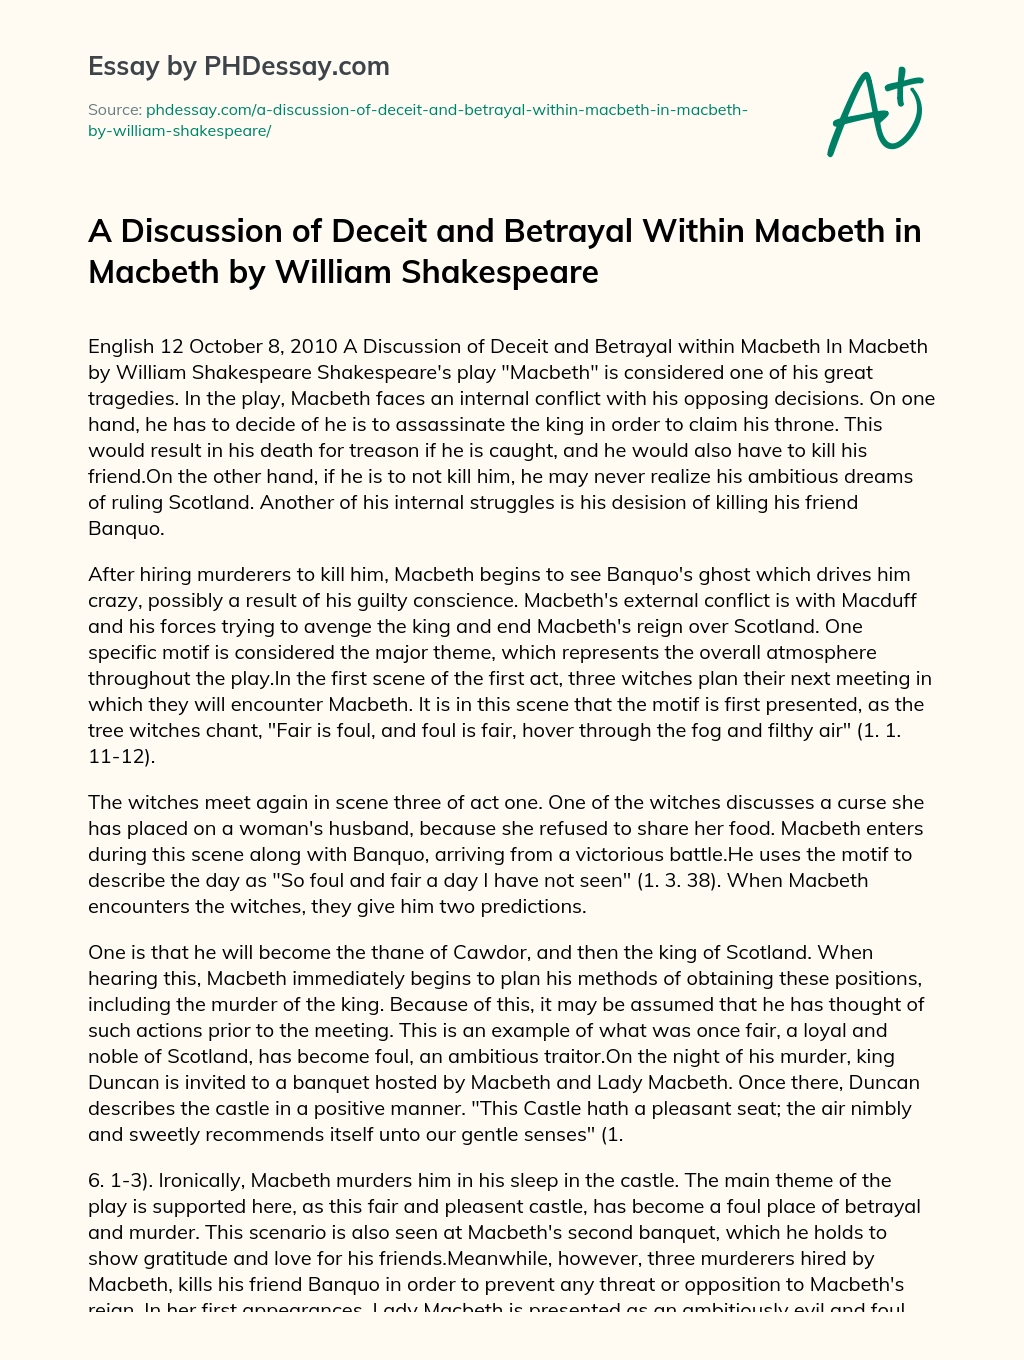 A Discussion of Deceit and Betrayal Within Macbeth in Macbeth by William Shakespeare essay